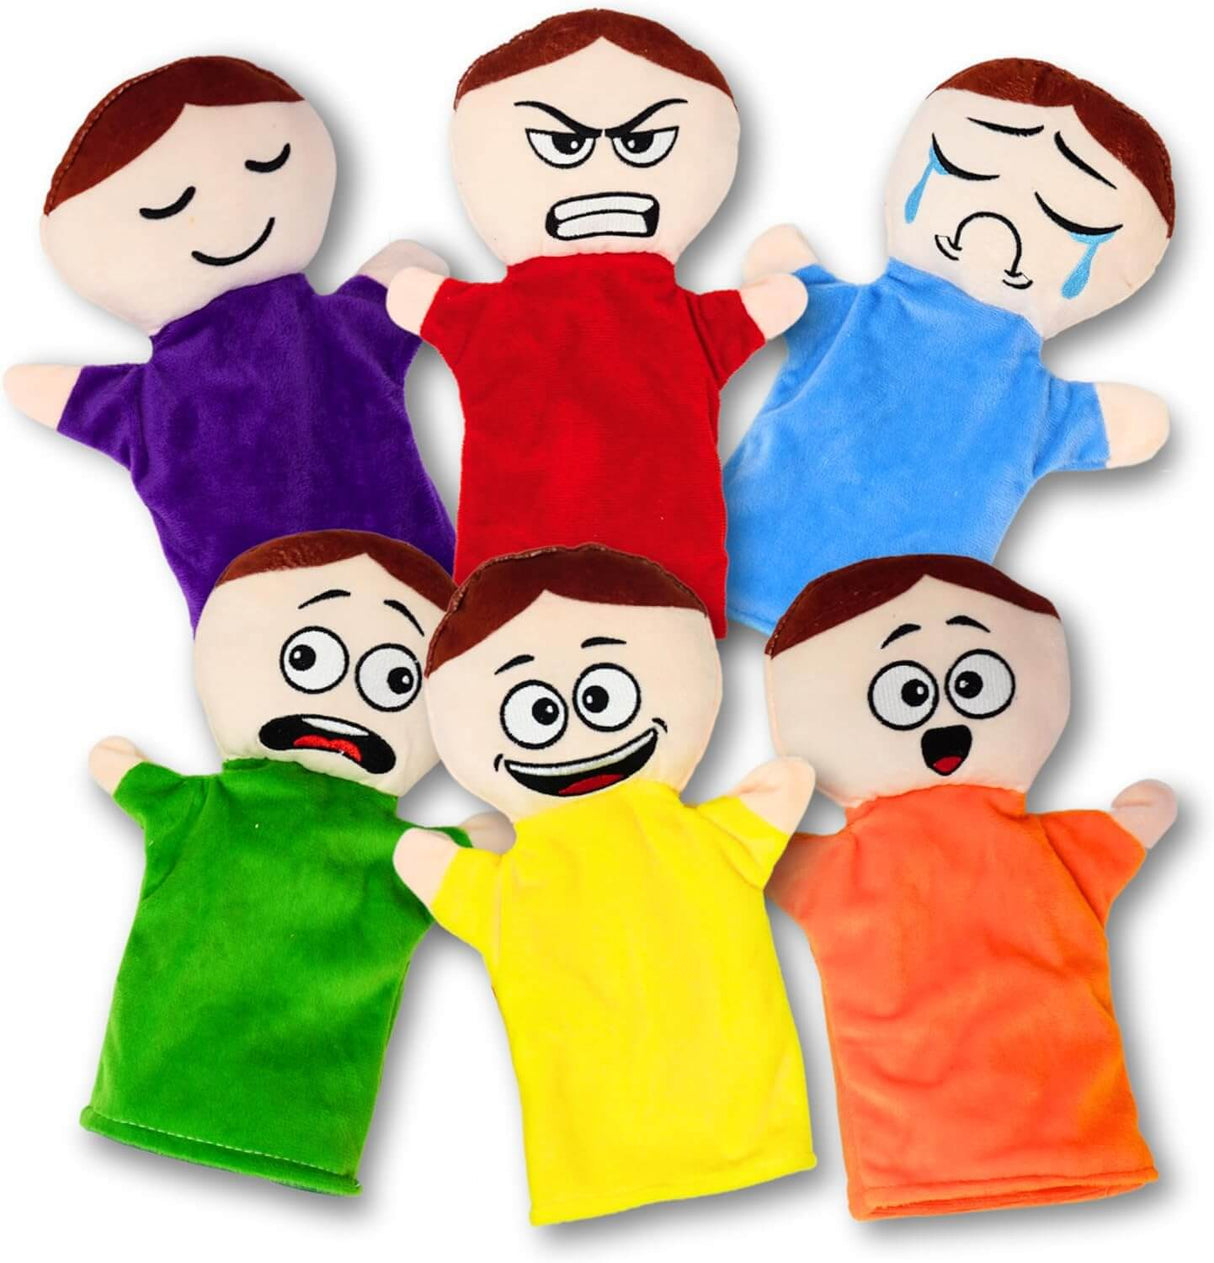 6 Pack Feeling Hand Puppets for Kids with 6 Core Emotions, with Moveable Arms, Soft Plush Hand Puppets for Toddlers, Early Education Toys, Social Emotional Learning Activities by 4E's Novelty